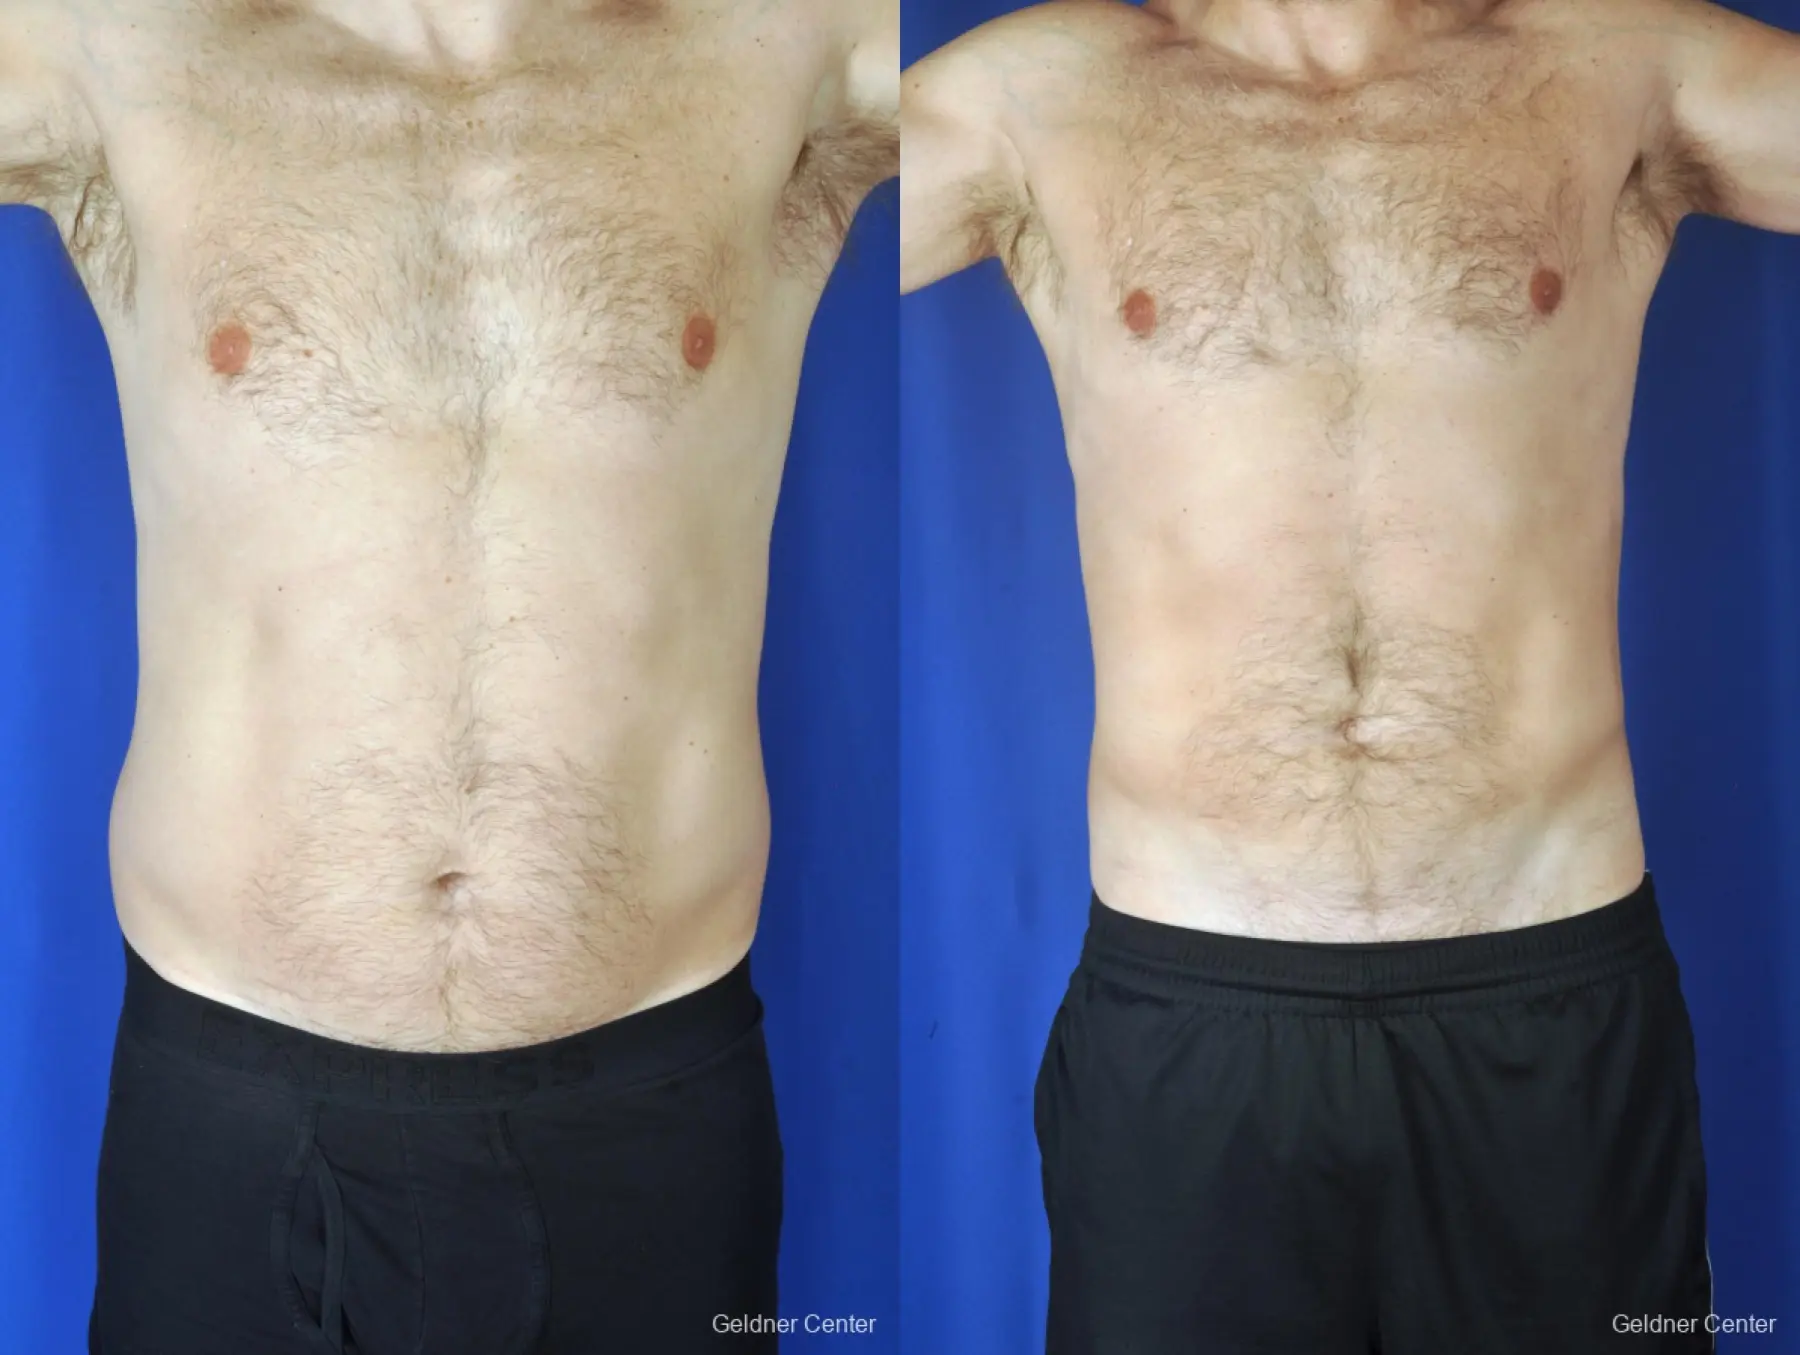 Liposuction For Men: Patient 7 - Before and After 1